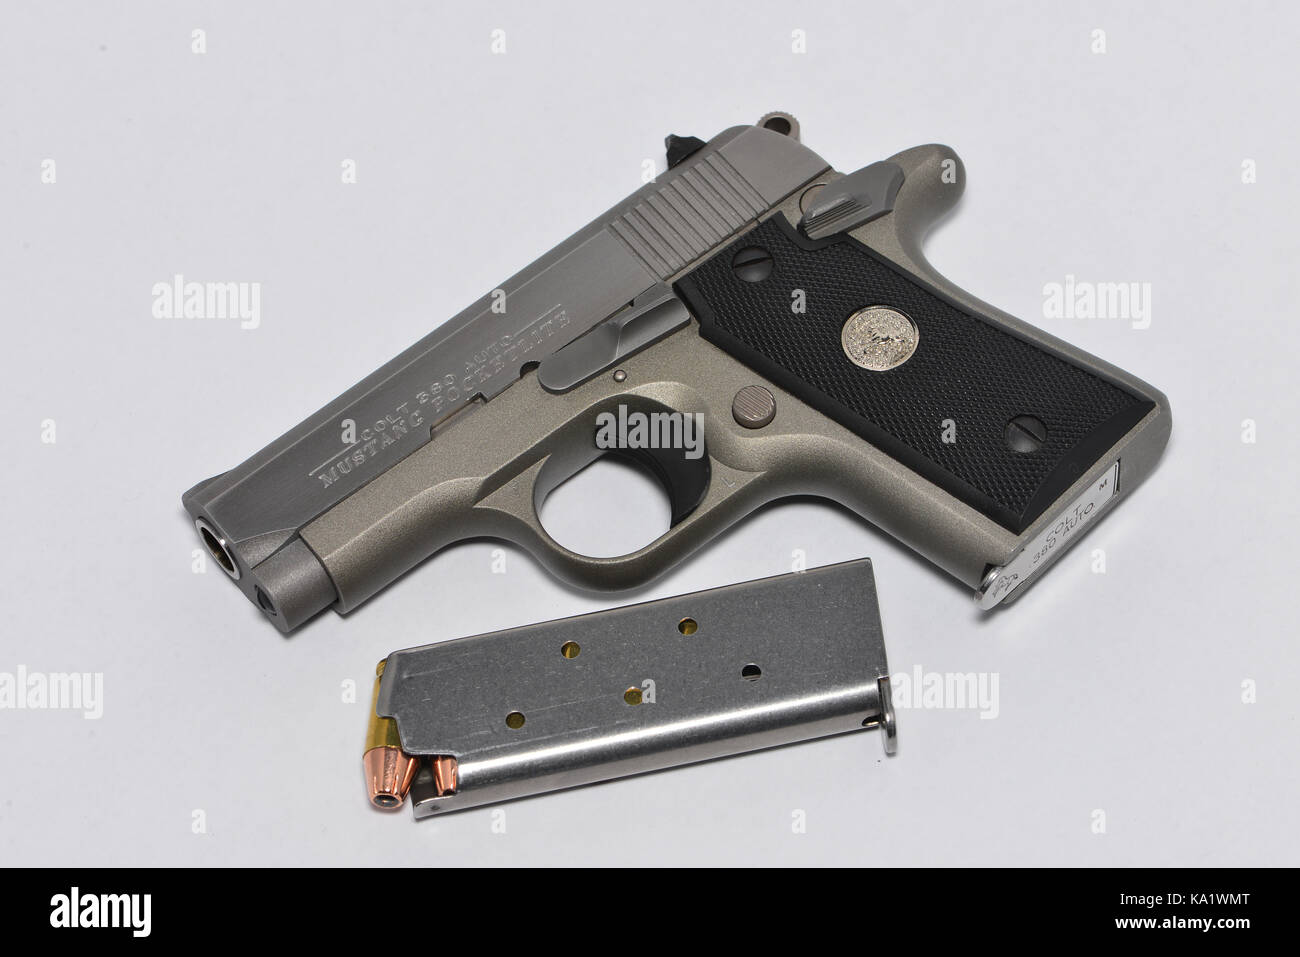 A loaded Colt Mustang .380 pocket pistol with an extra magazine full of jacketed hollow point bullets. Stock Photo